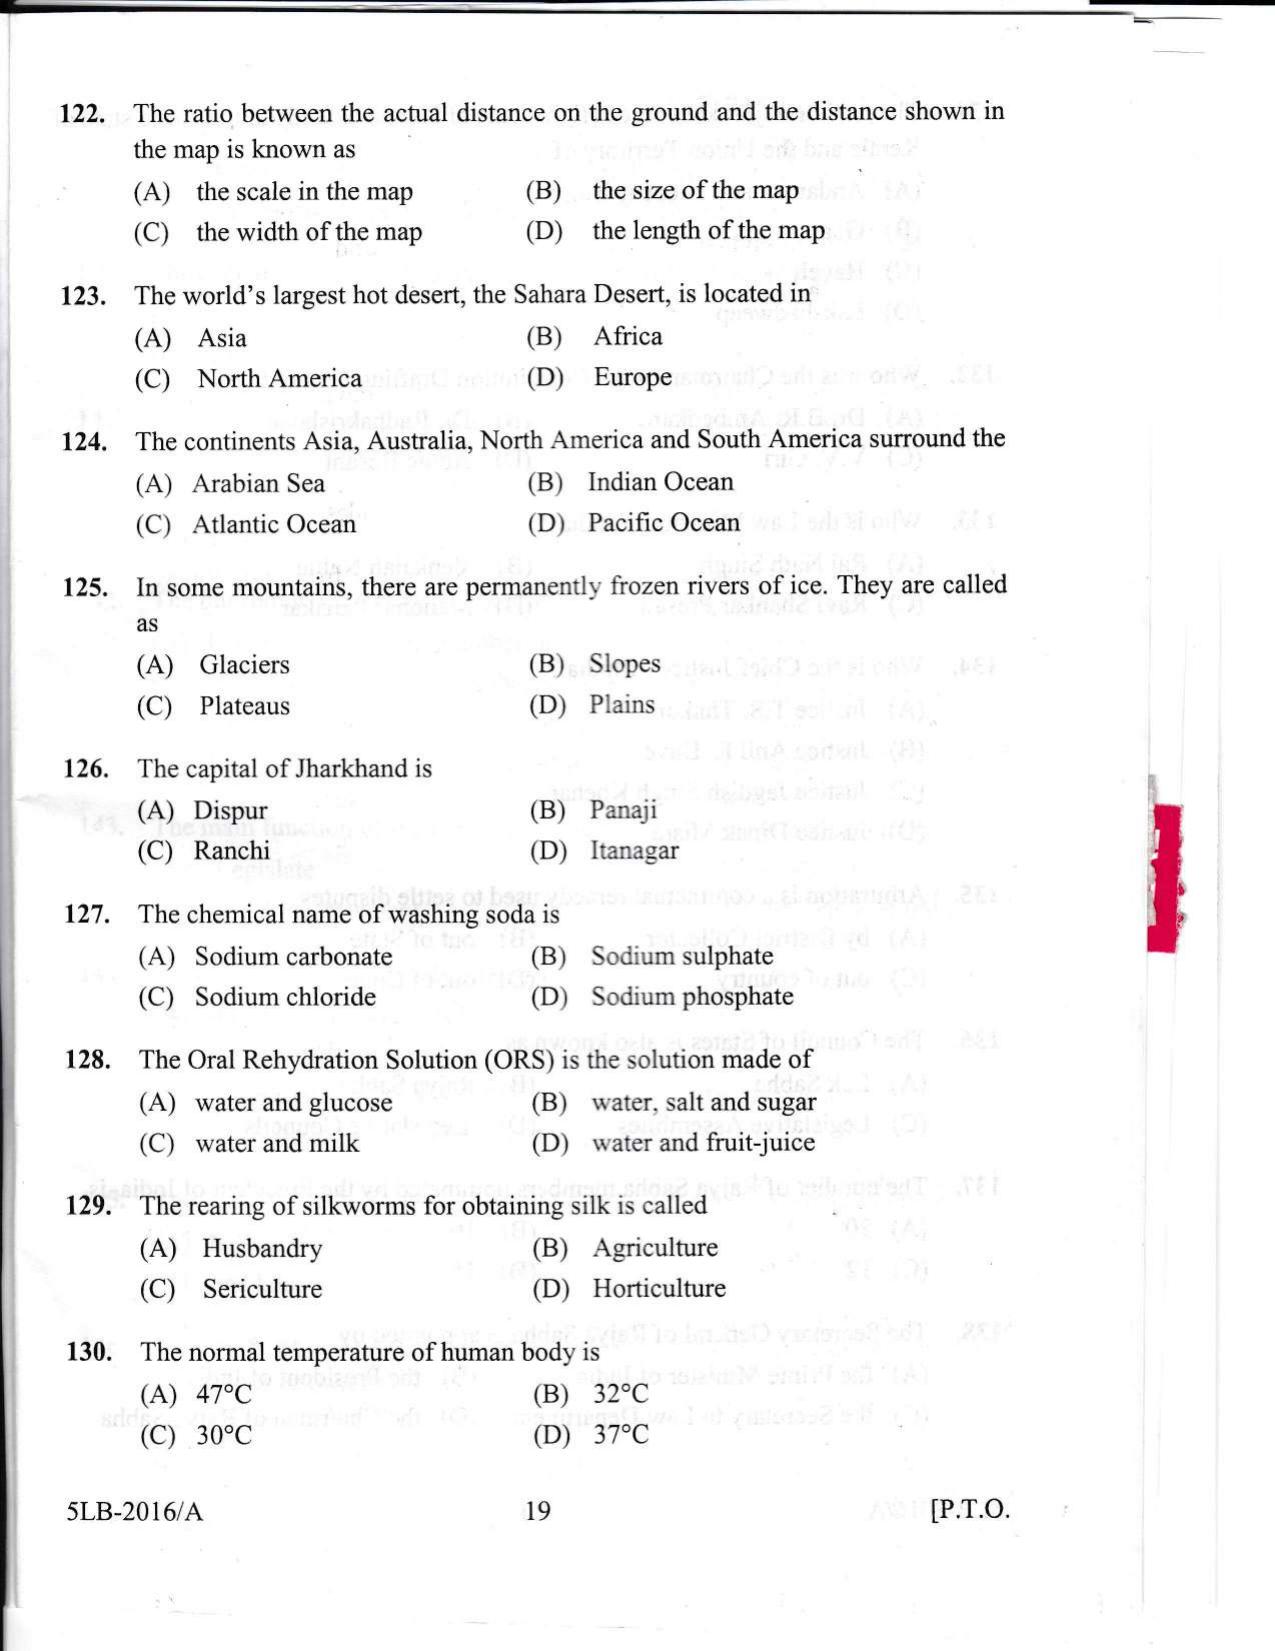 KLEE 5 Year LLB Exam 2016 Question Paper - Page 19